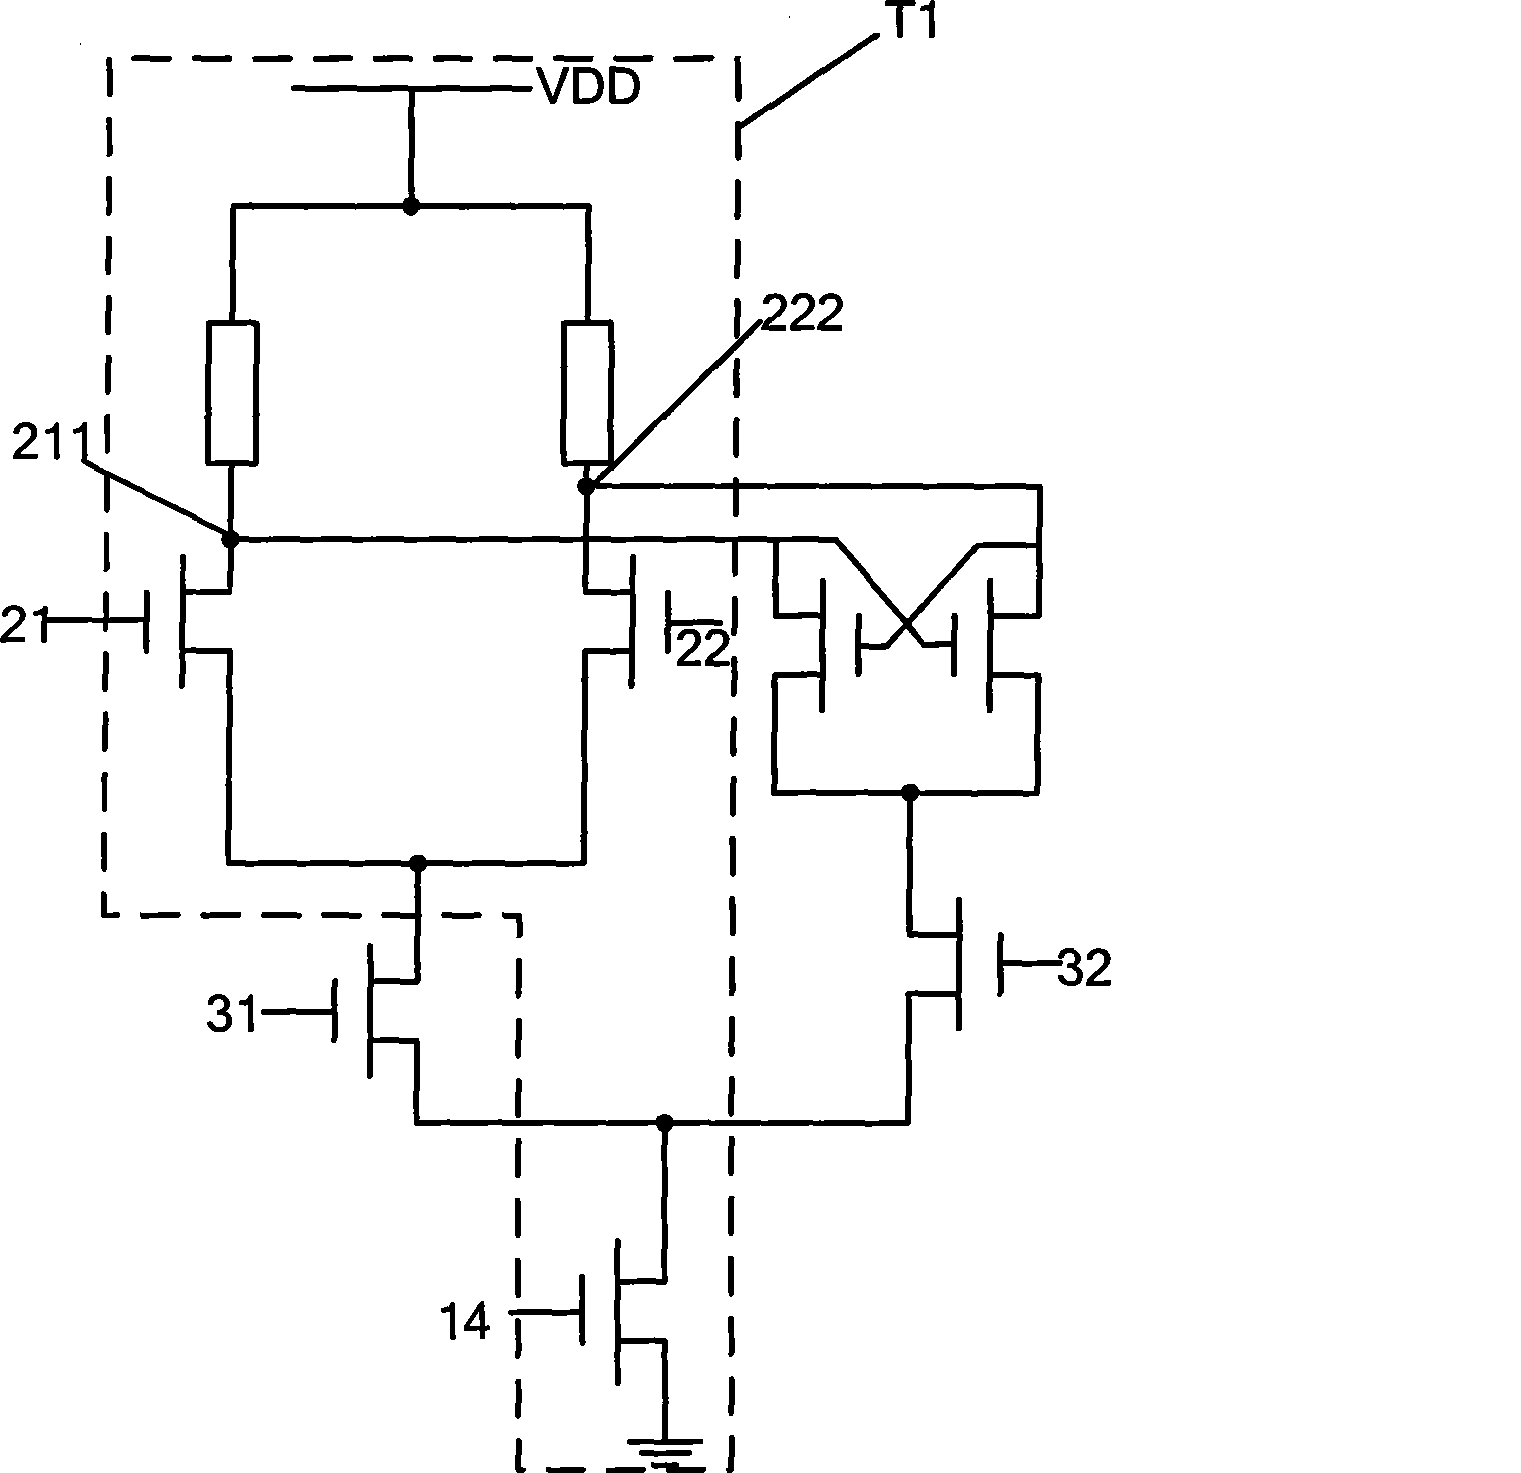 Change-over circuit from CMOS to MCML